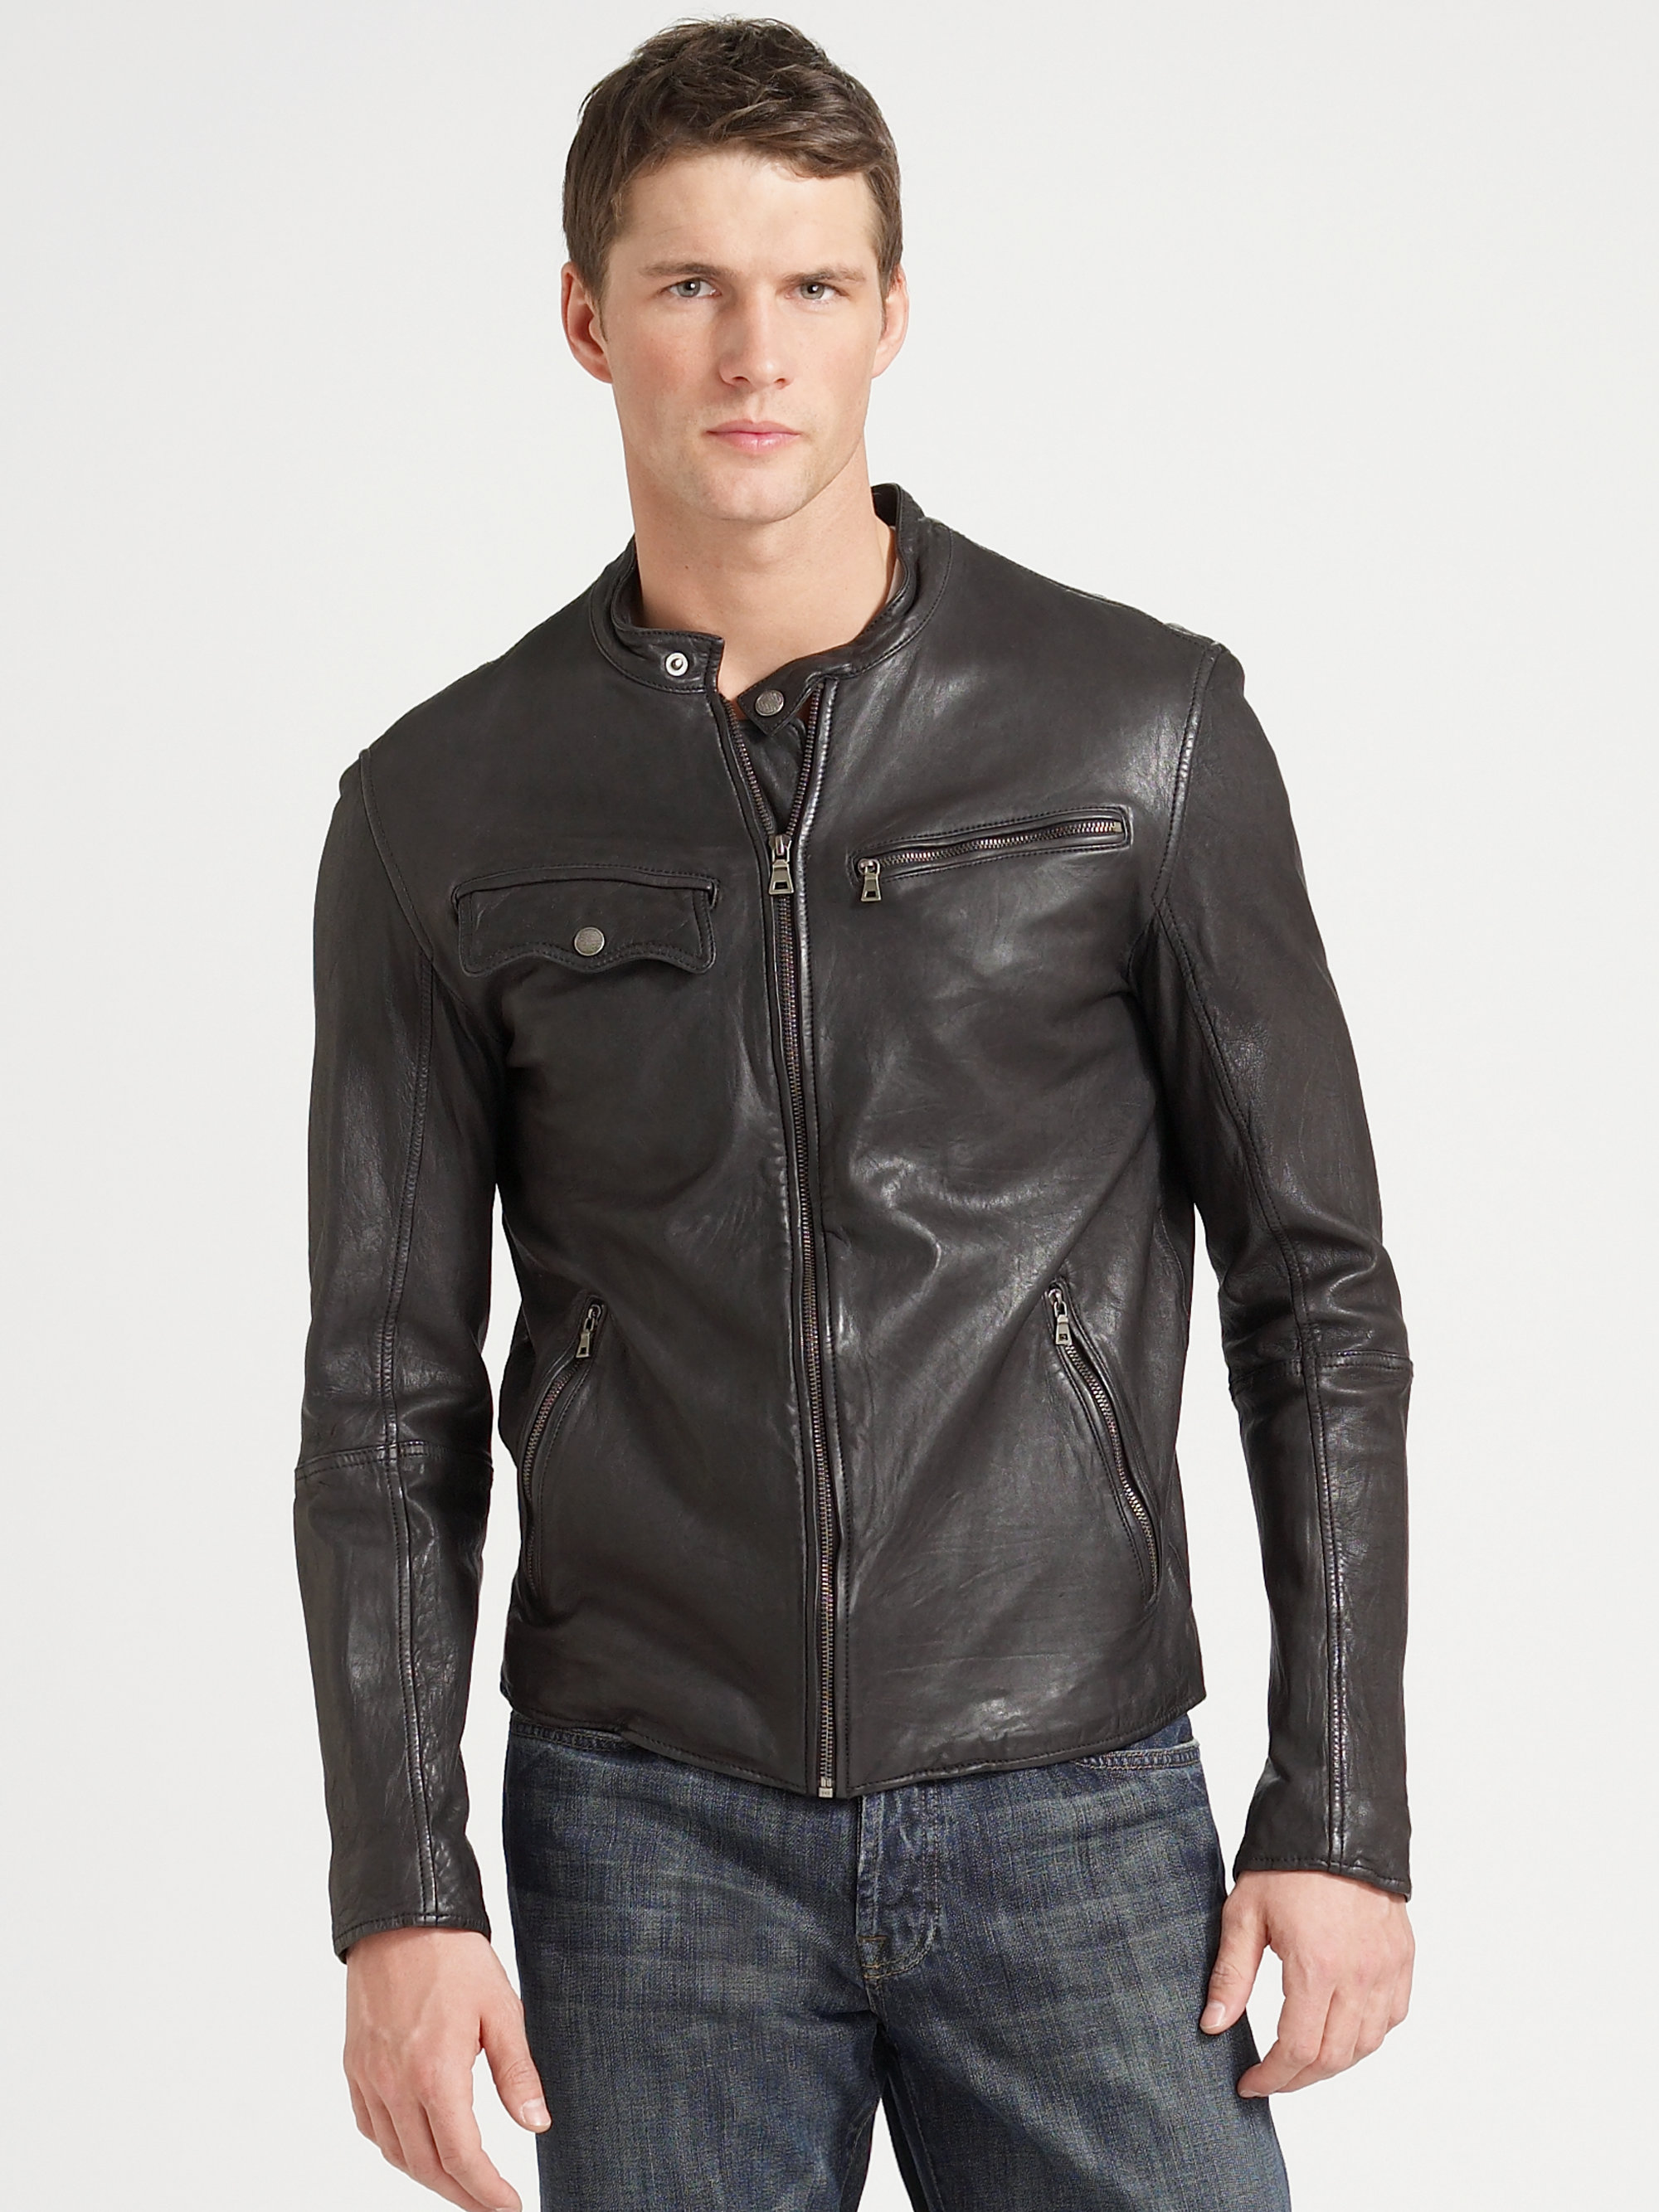 Lyst - Cole Haan Washed Leather Motorcycle Jacket in Black for Men